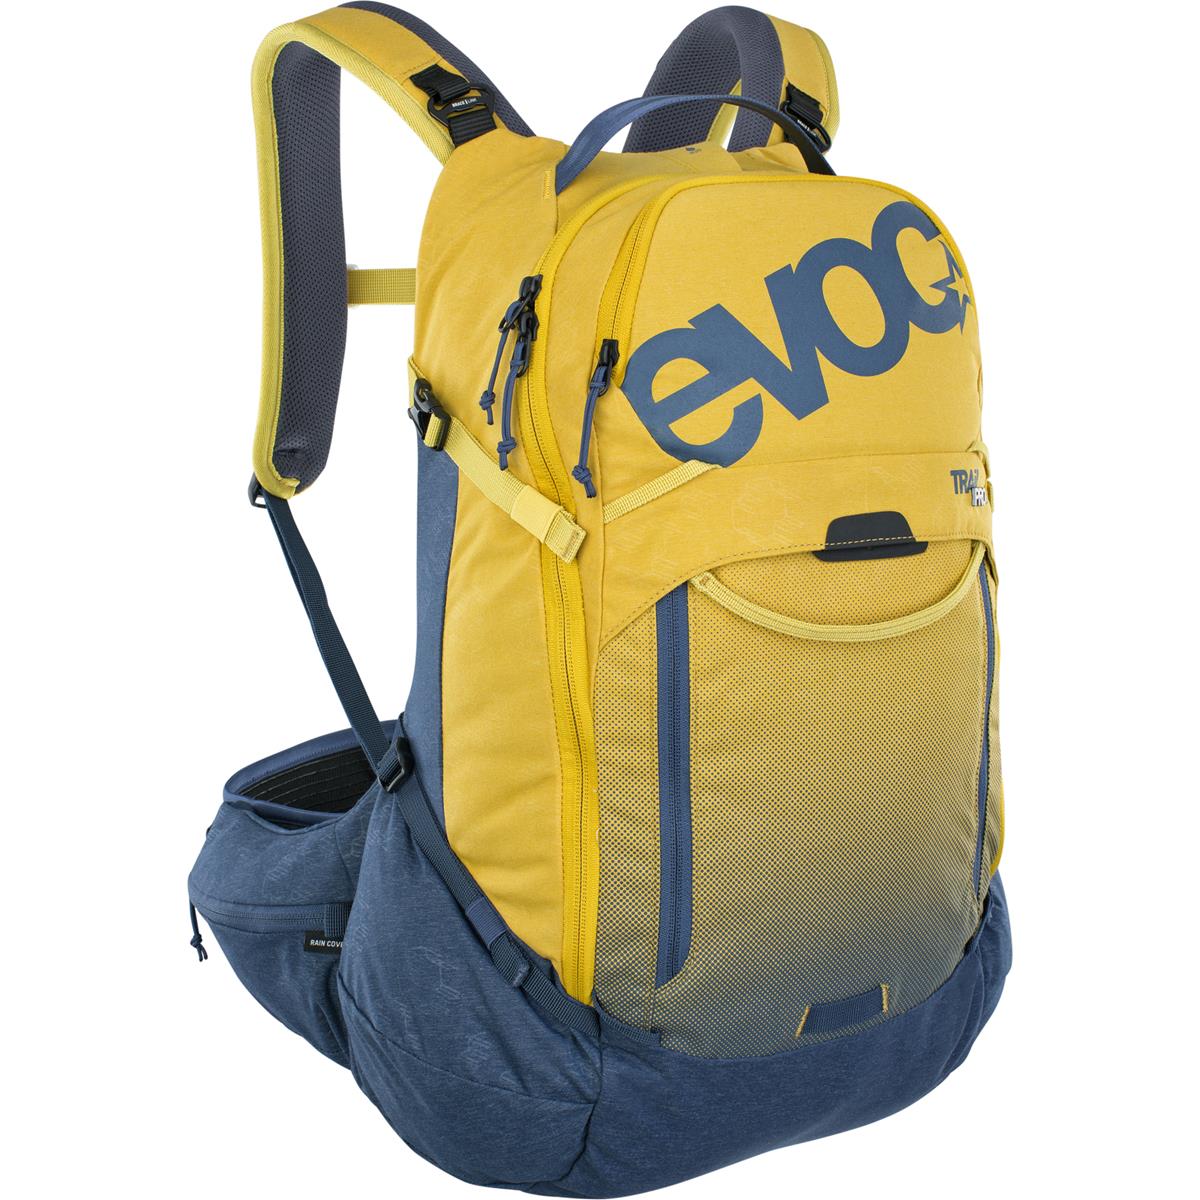 Evoc Protector Backpack Trail Pro 26 26L - Curry/Denim